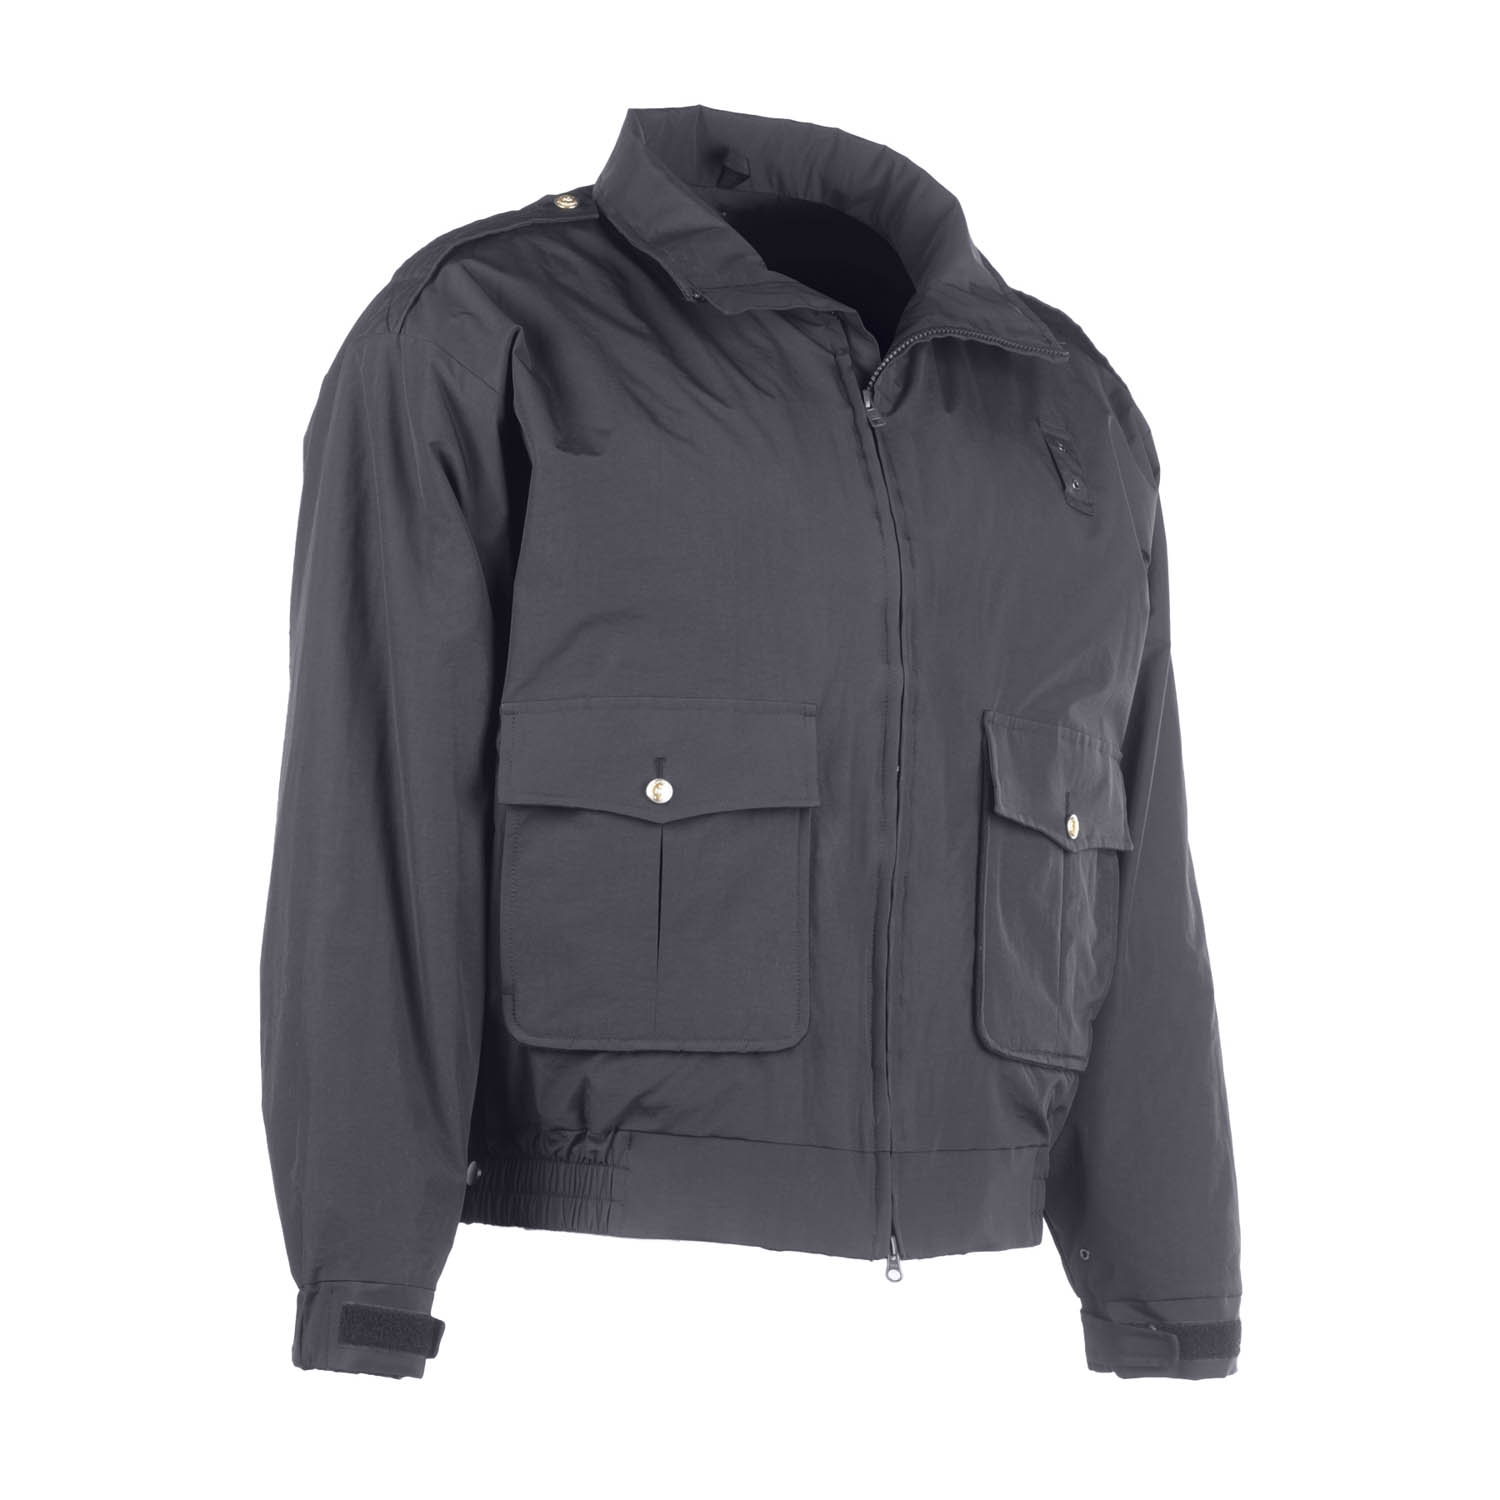 NAVY BOMBER JACKET WIND/WATER RESISTANT WITH THINSULATE LINER